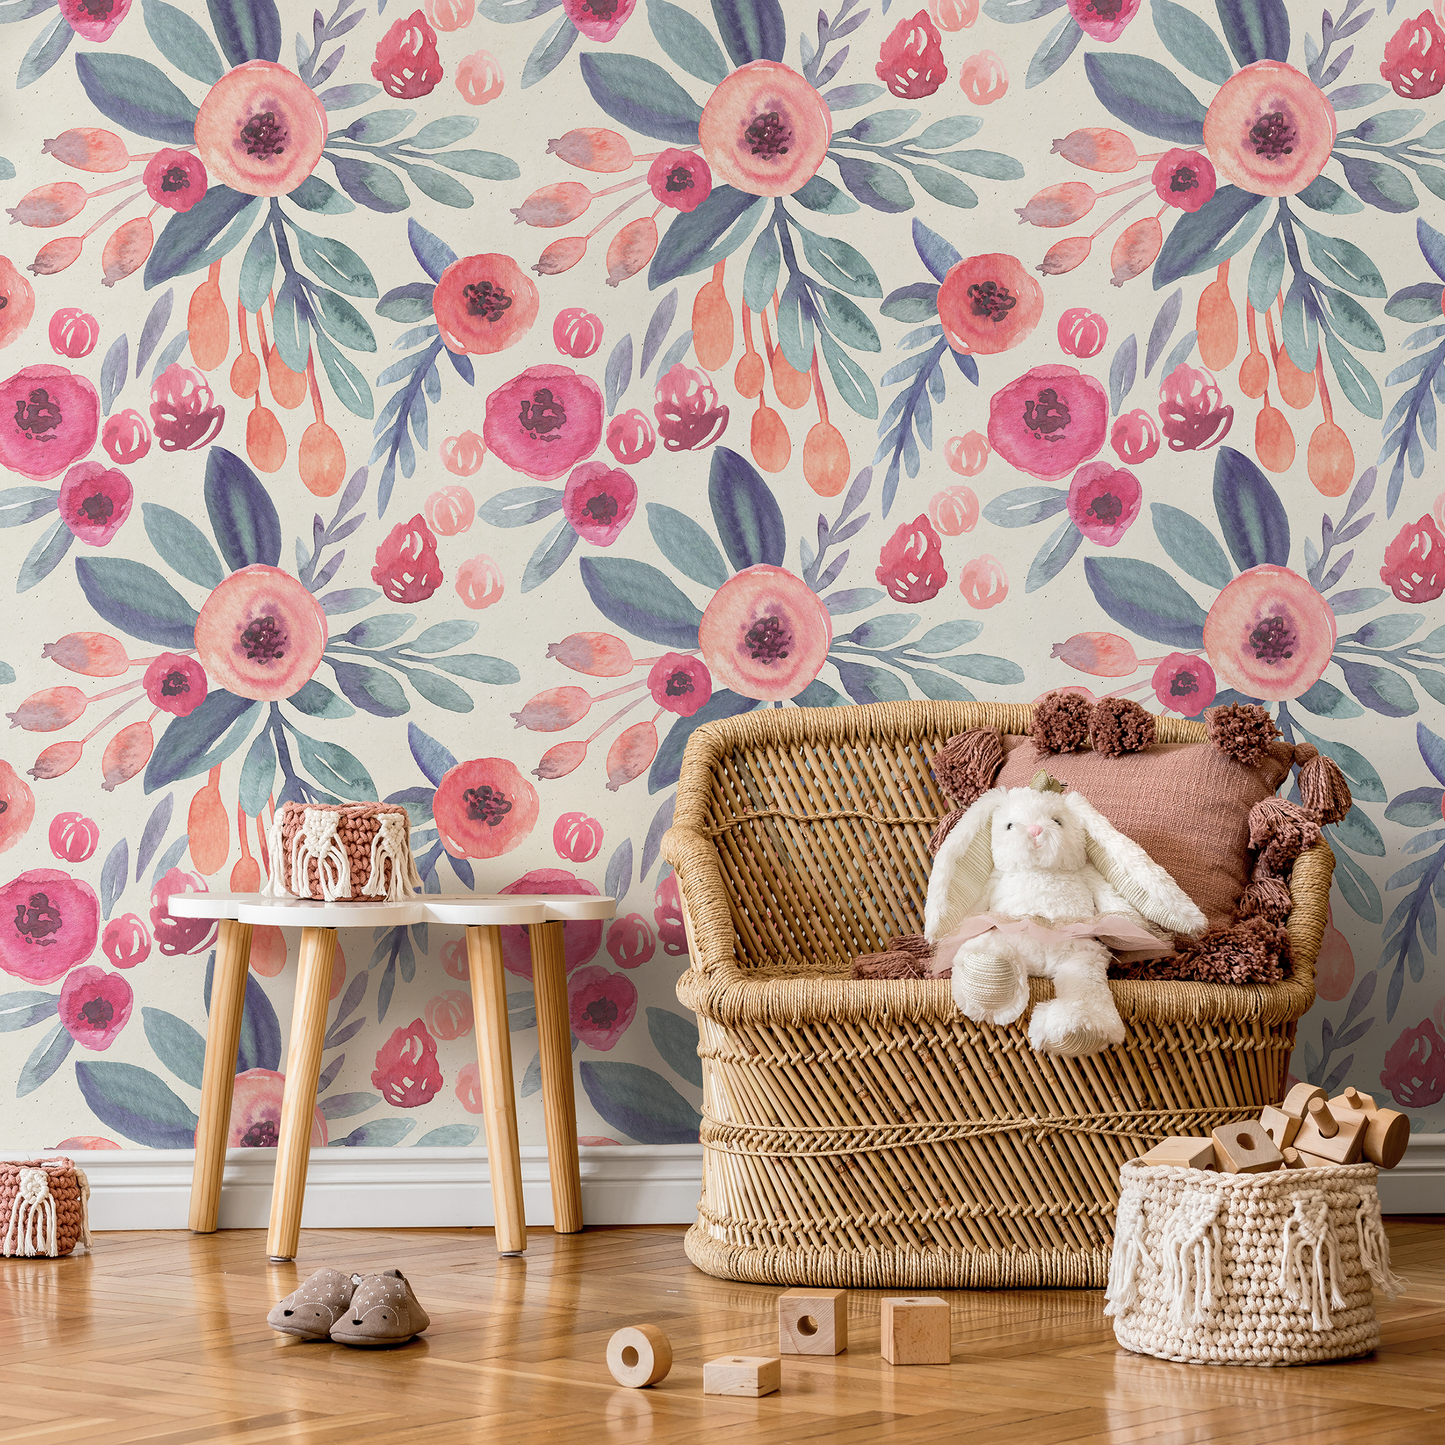 Floral Watercolor  Wallpaper Nursery Flowers Wallpaper Peel and Stick Wallpaper Home Decor - A264